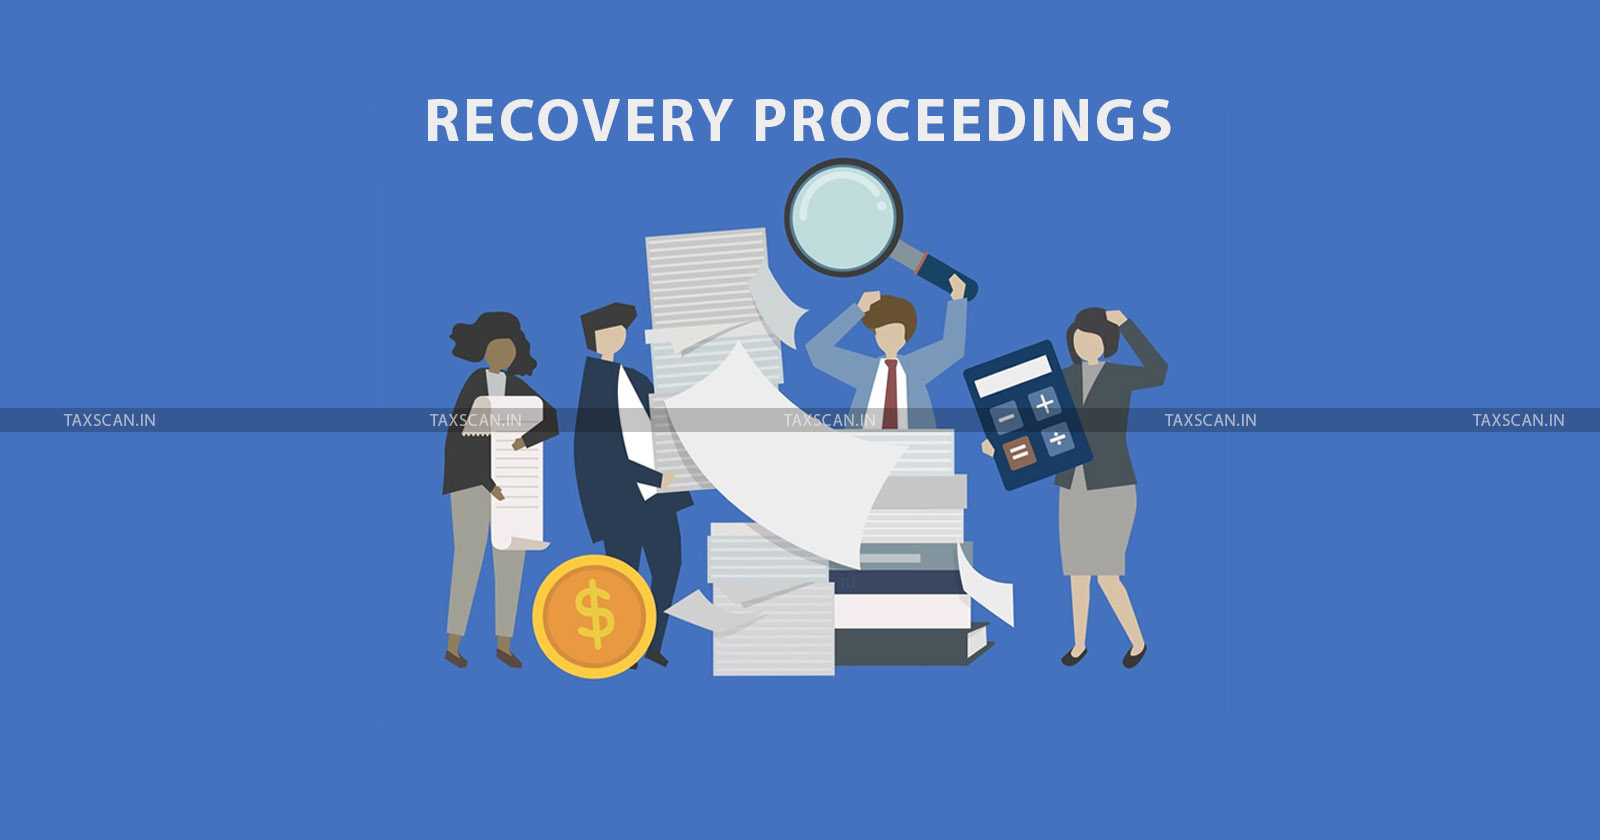 Kerala HC stays Recovery Proceedings - Recovery Proceedings - Kerala High Court Stays - Recovery Proceedings under Income Tax - Disposal of Stay Application - TAXSCAN